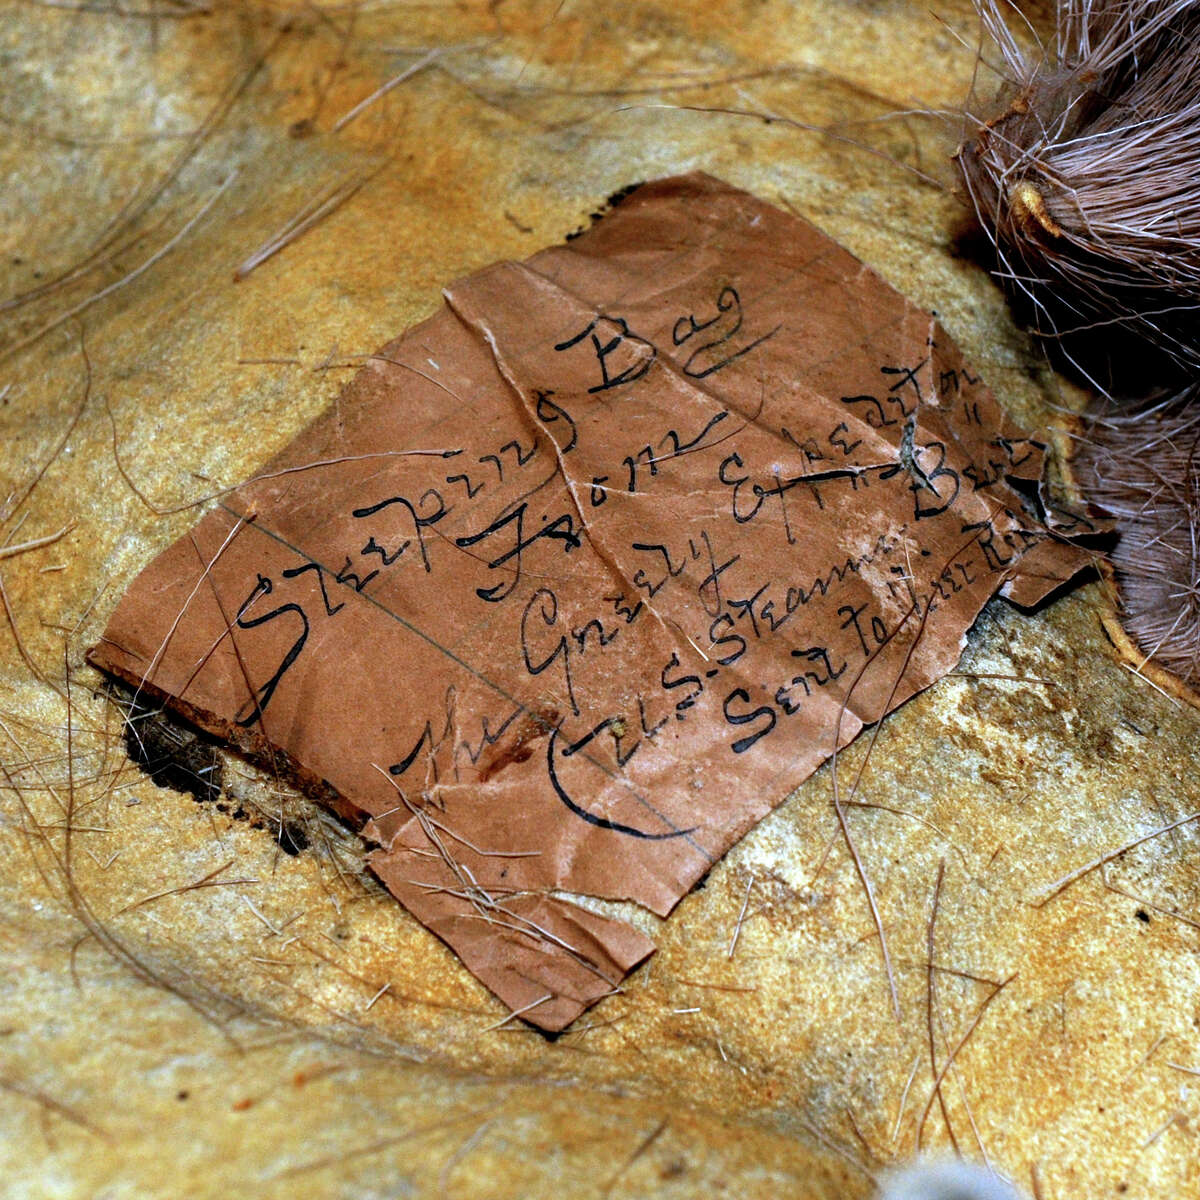 A label sewn inside of an antique sleeping bag on display at the Barnum Museum, in Bridgeport, Conn. Feb. 14, 2014. The sleeping bag dates back to 1884, when it was used during a the rescue of The Greely Expedition. The ill-fated arctic expedition was led by Adolphus Greely.